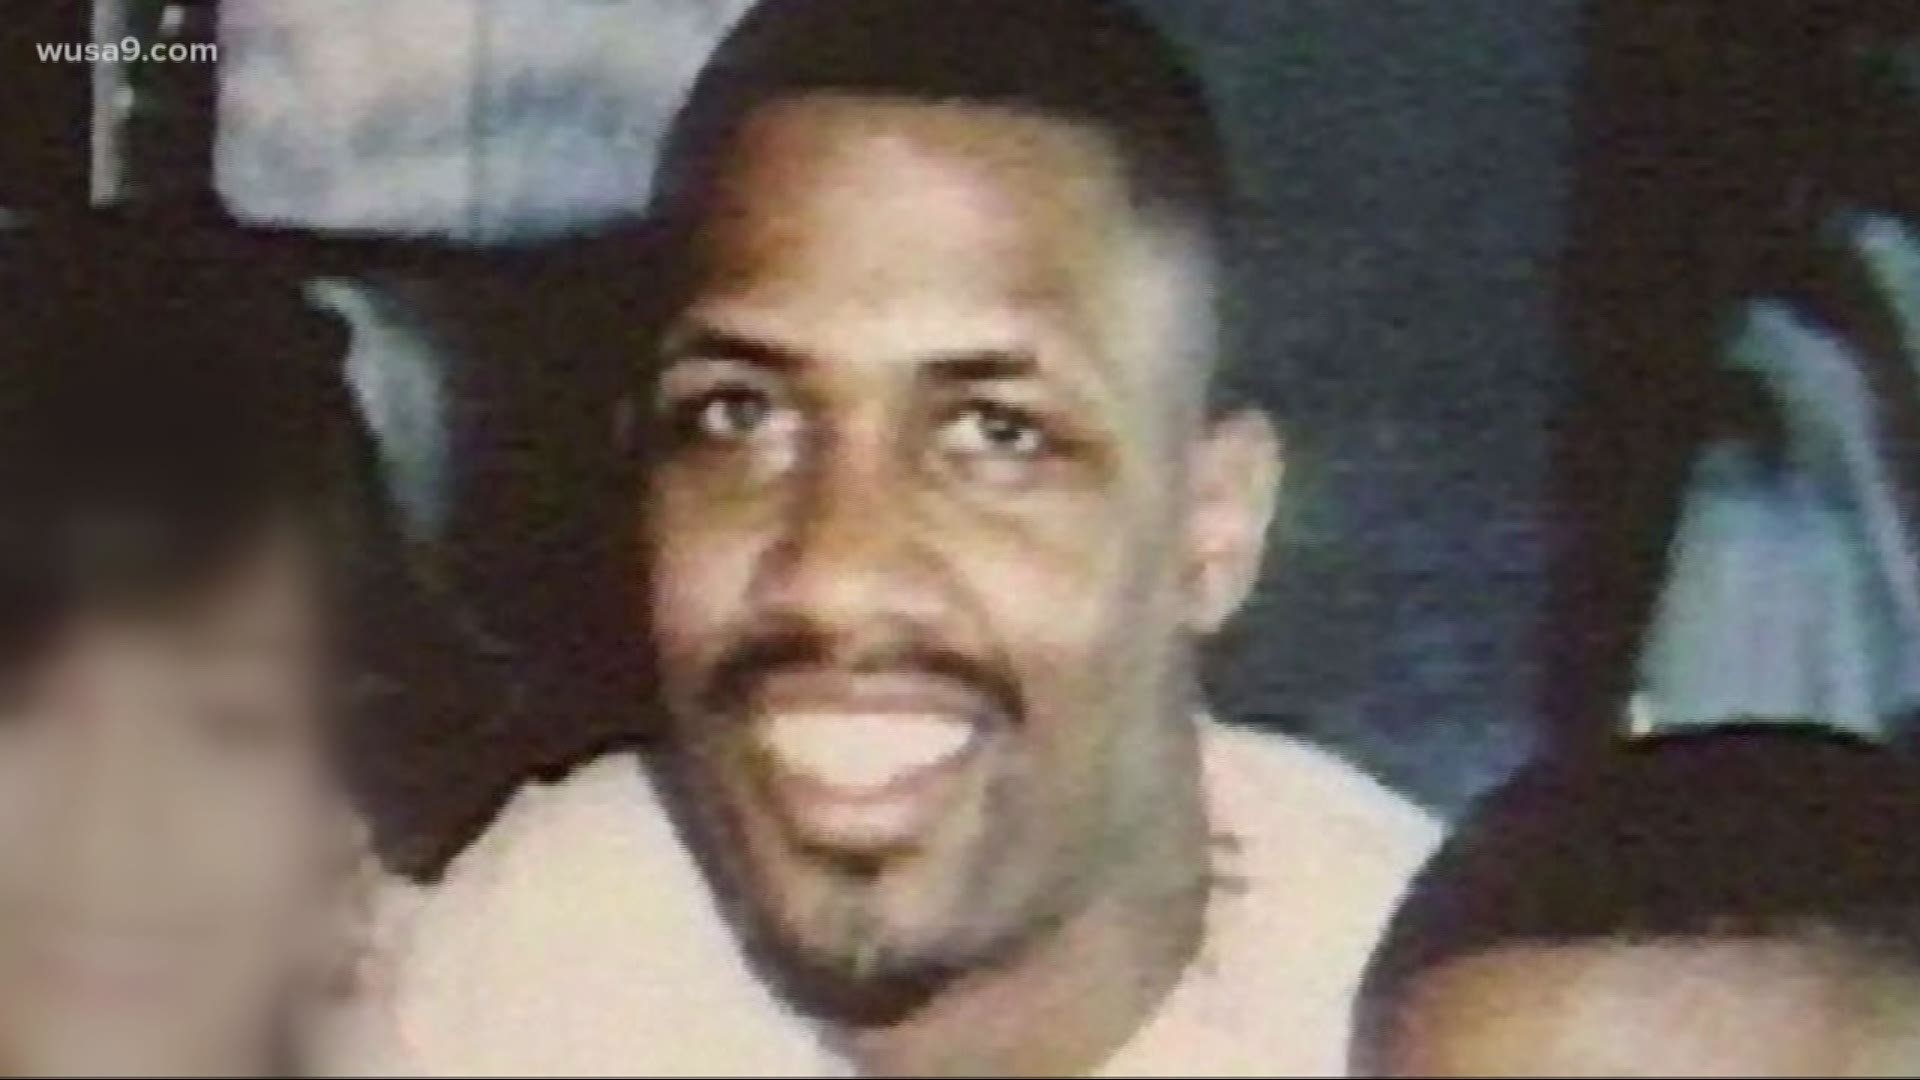 Edmond, 54, had been sentenced to life in prison in 1989 for his role in creating one of the biggest crack cocaine operations in DC history.